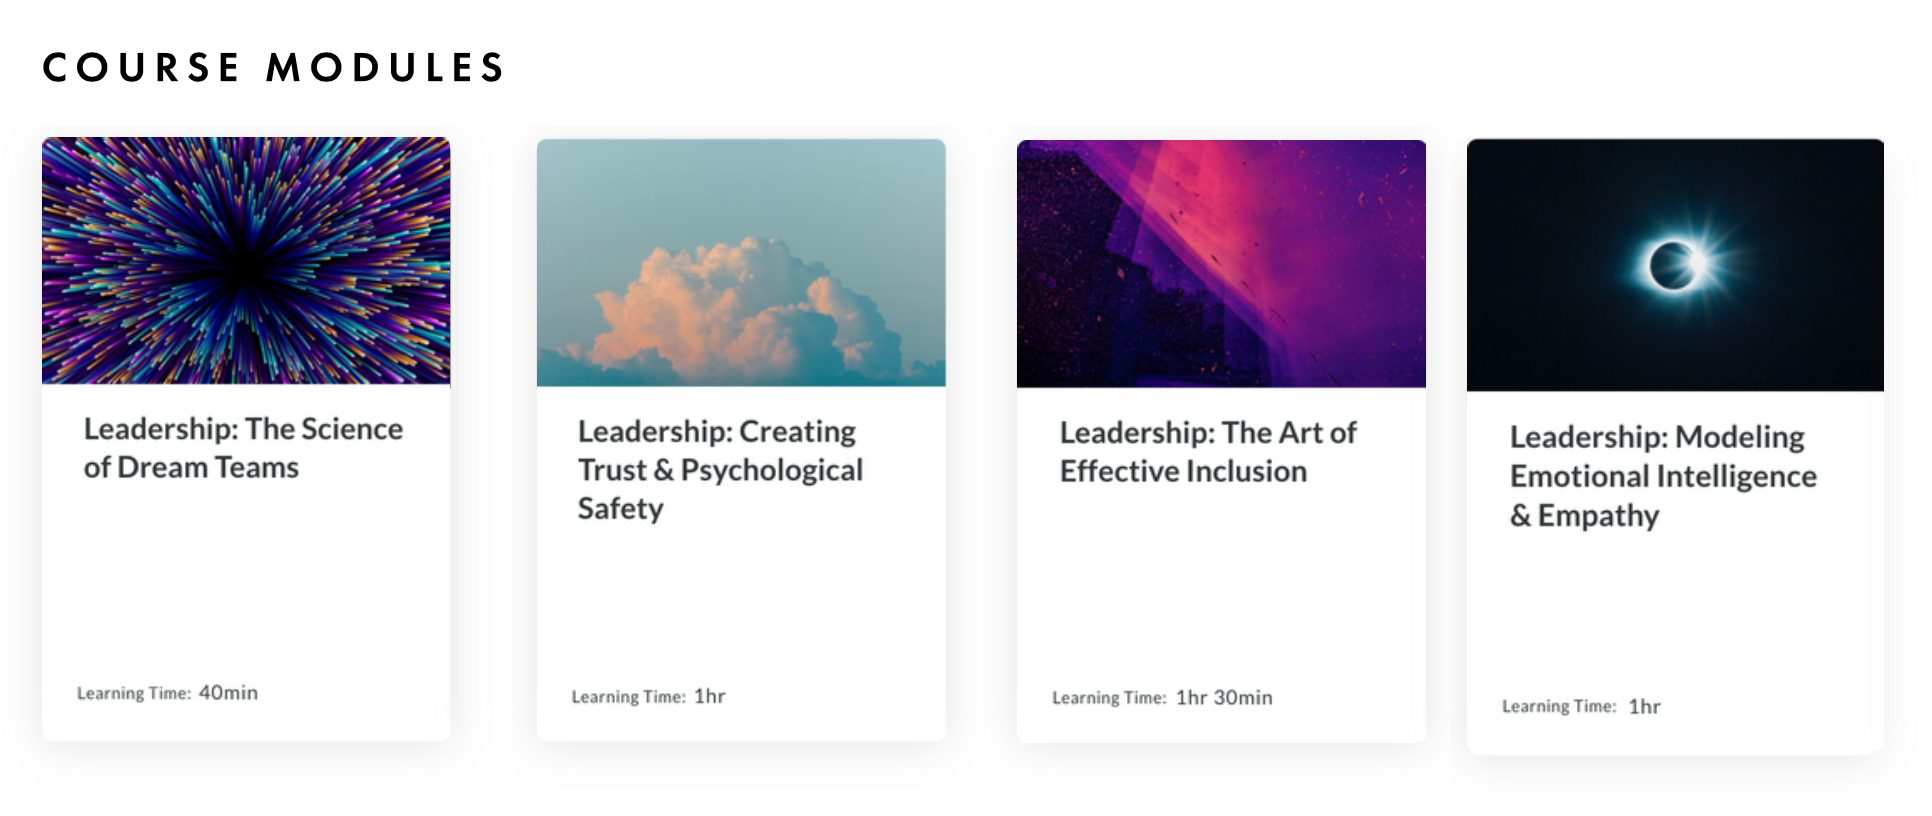 6 learning modules (5.75 hours of training)